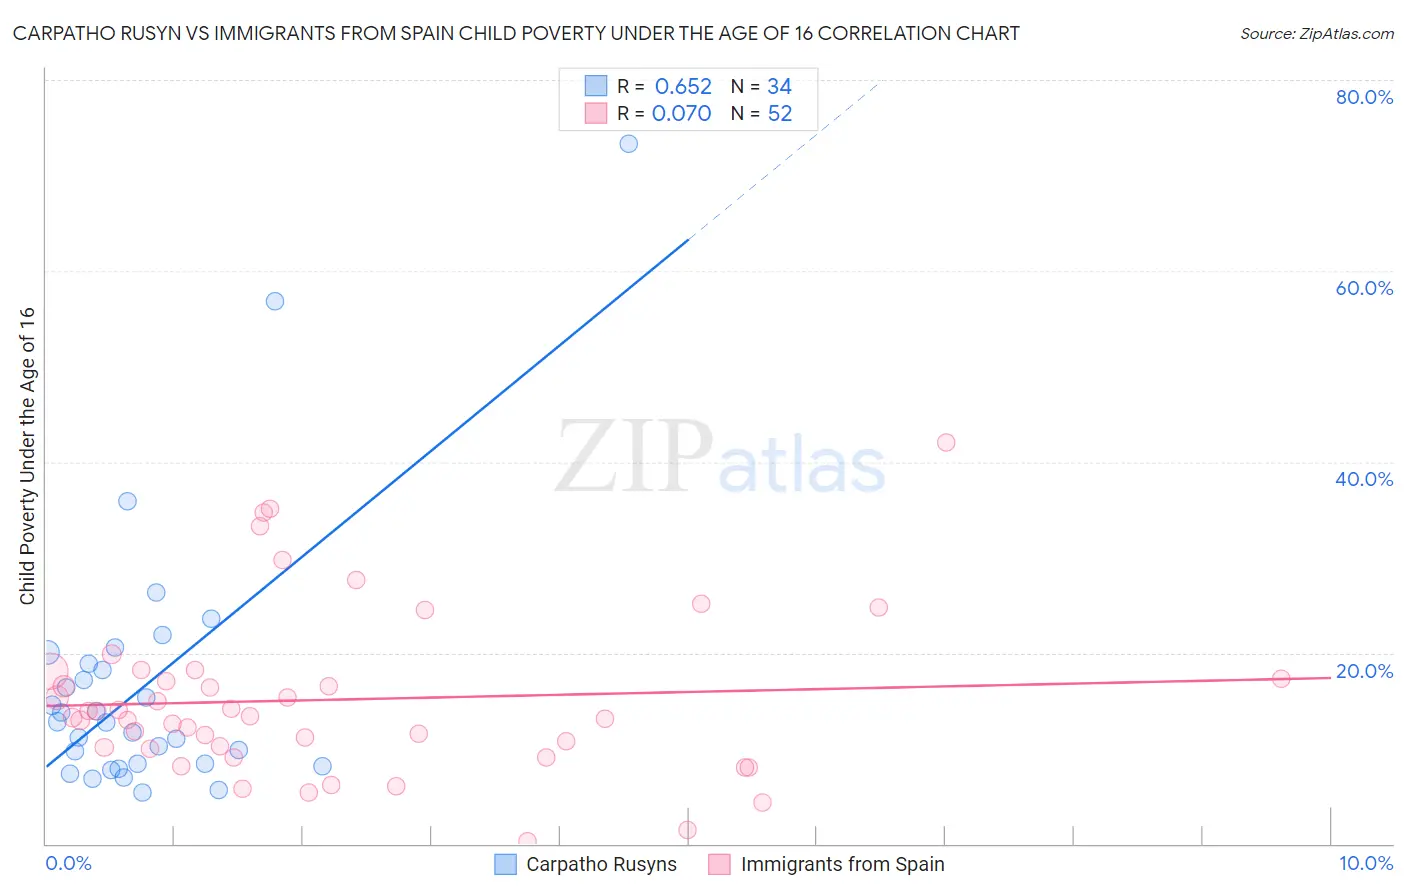 Carpatho Rusyn vs Immigrants from Spain Child Poverty Under the Age of 16